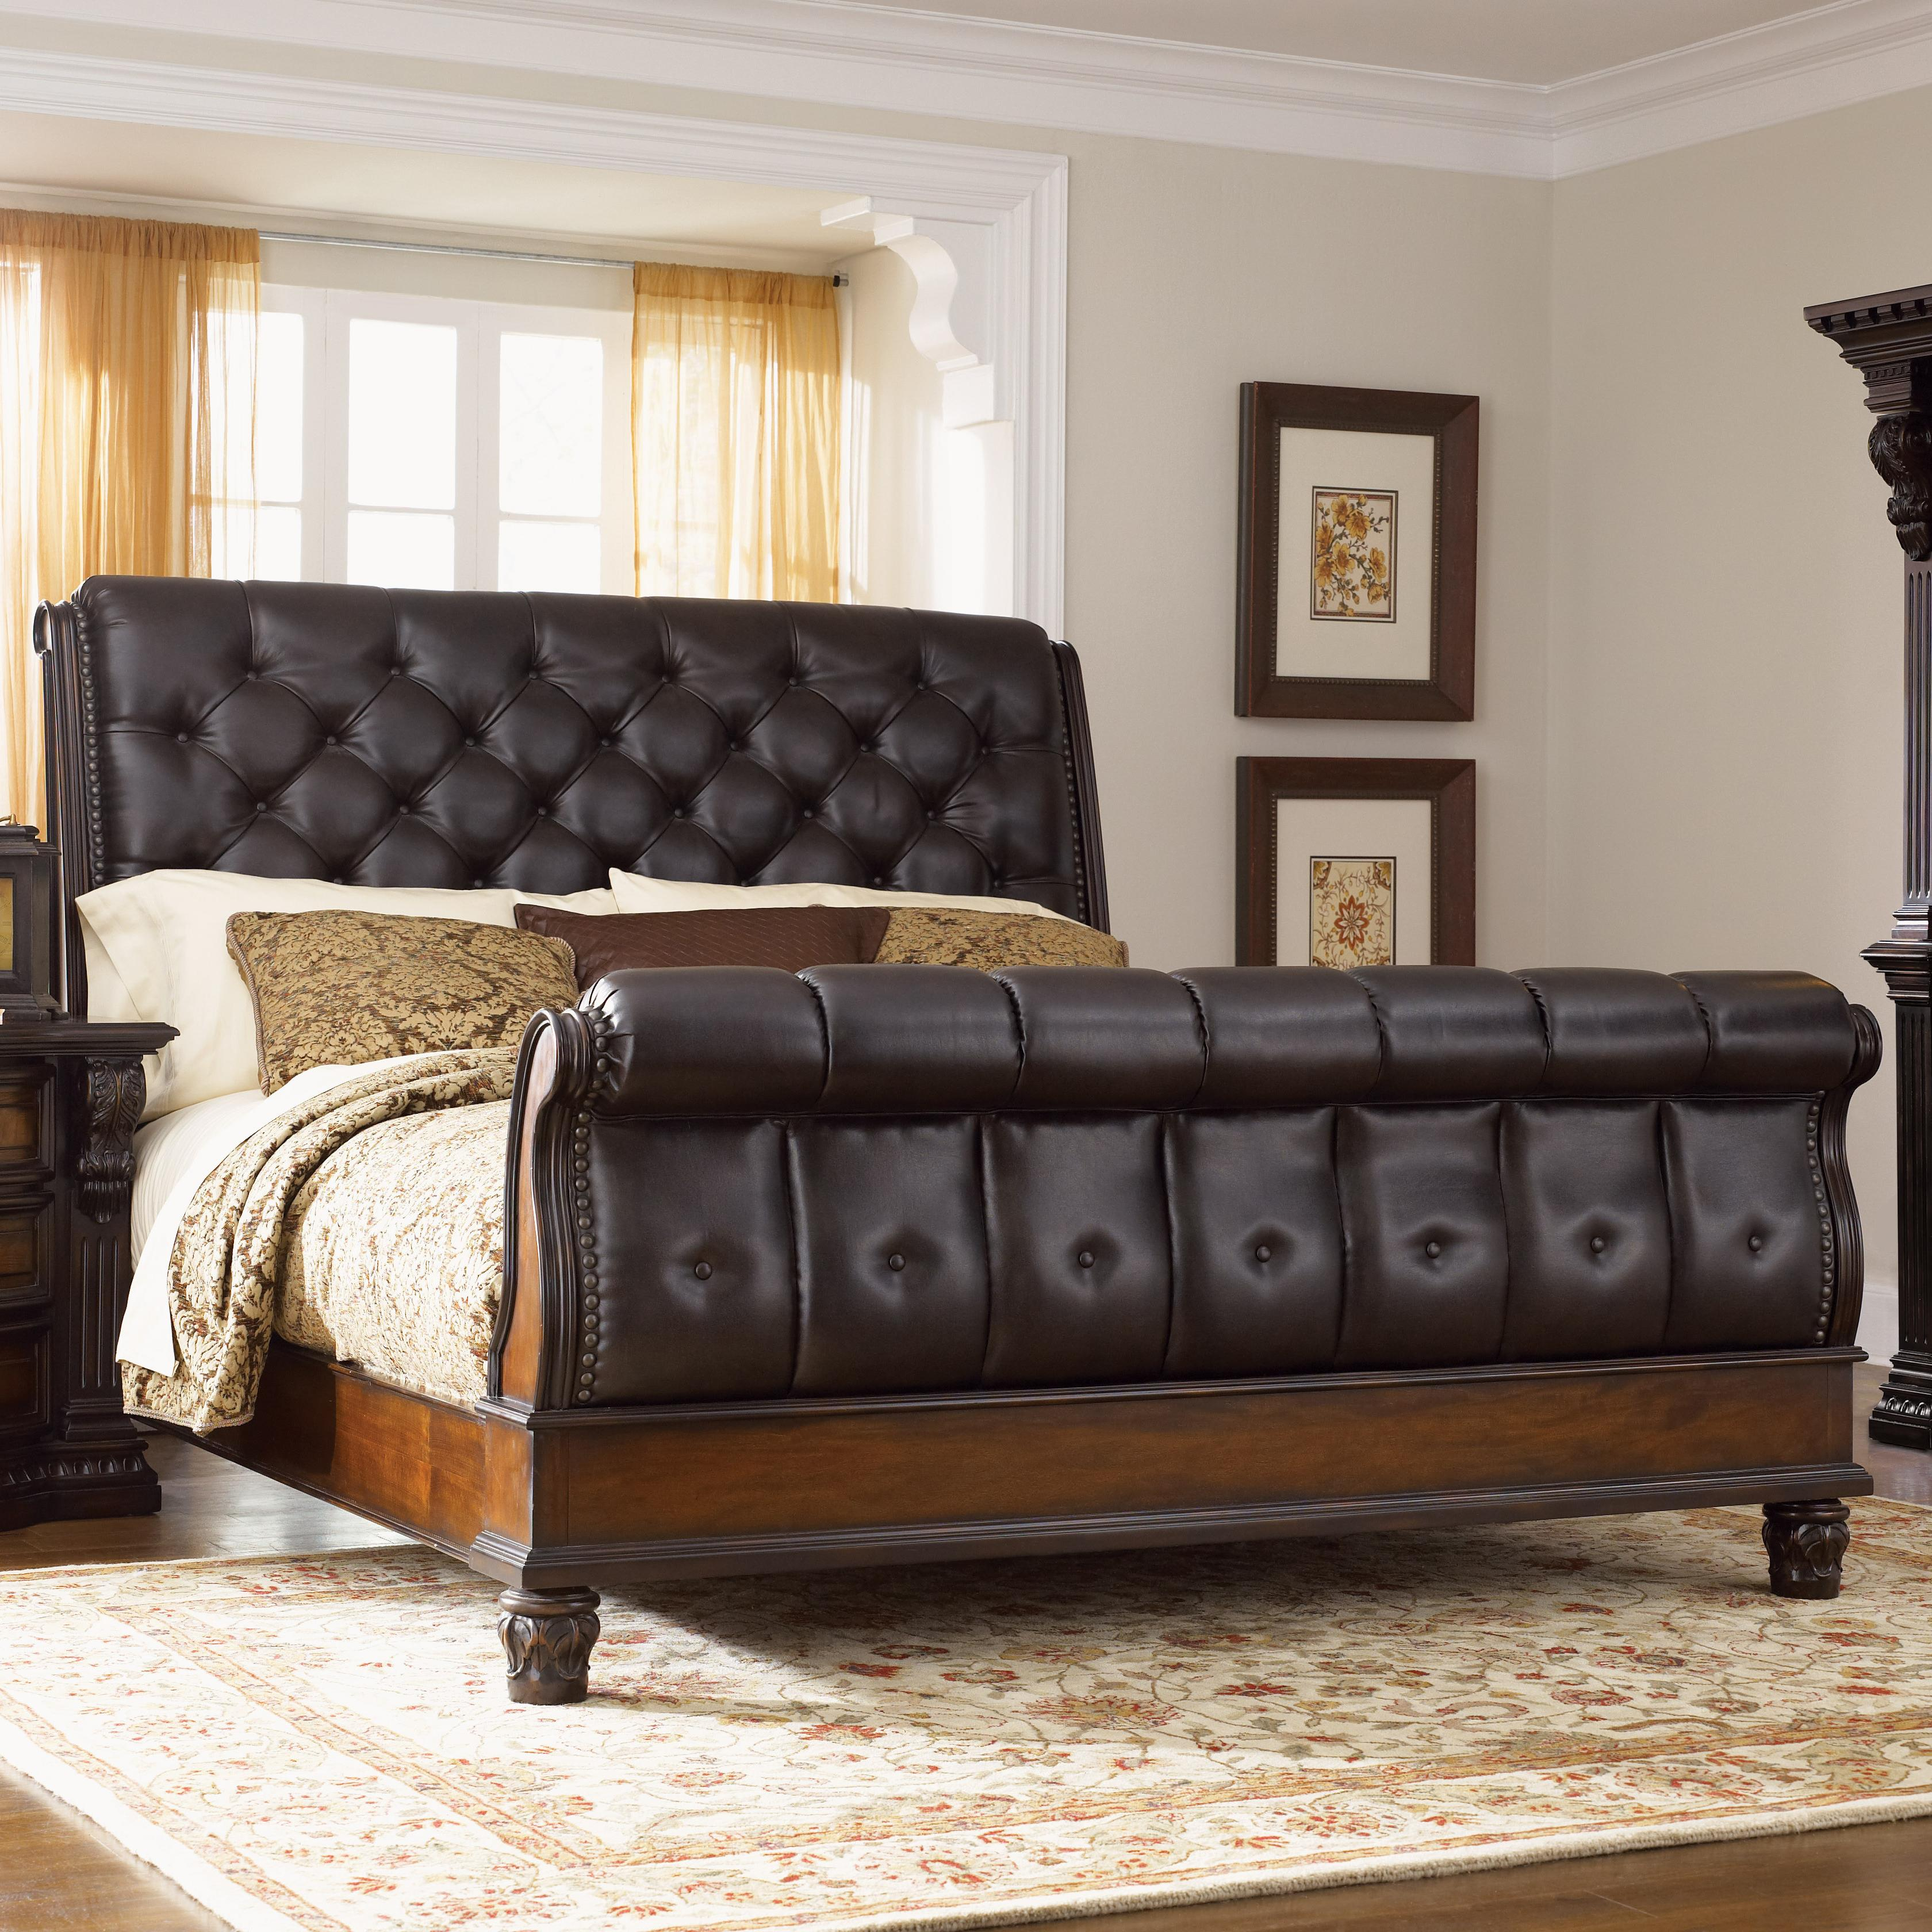 Grand Estates King Sleigh Bed W Leather Upholstery Fairmont Designs At Royal Furniture inside sizing 3360 X 3360